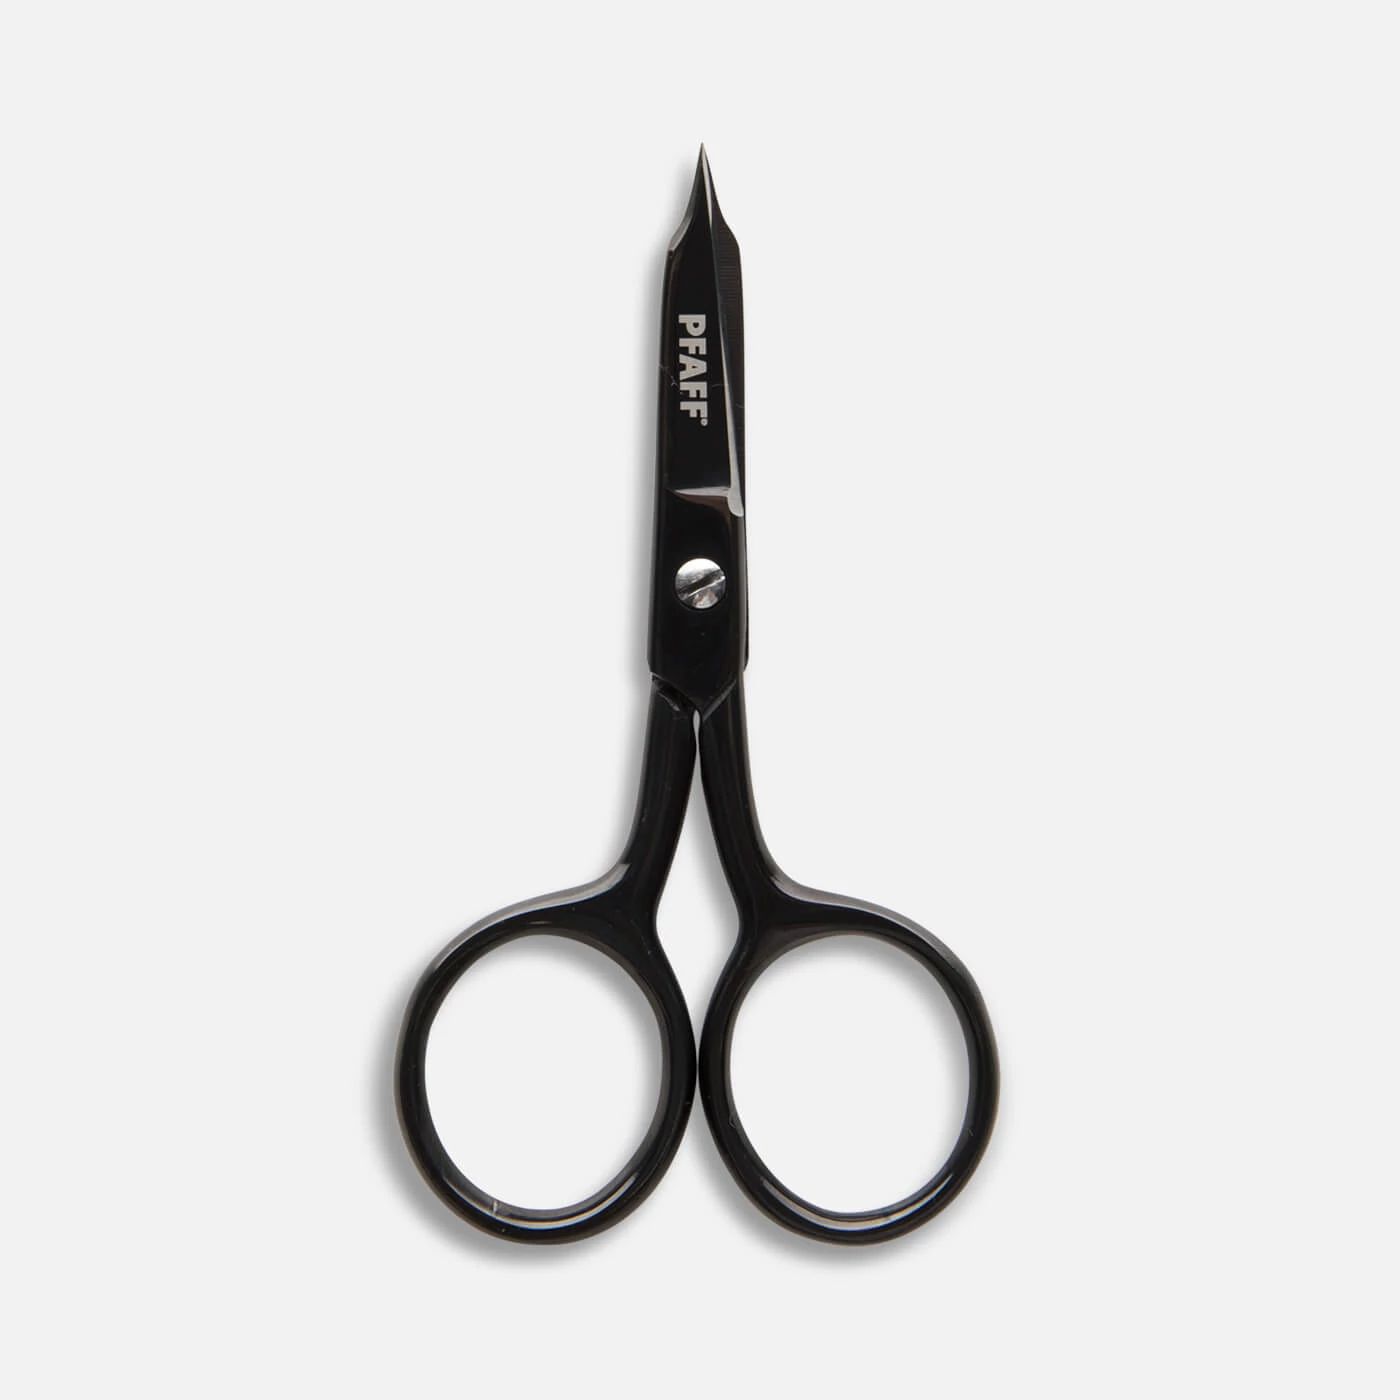 4 Fine Point Scissors, Curved Blade, Famore Cutlery 